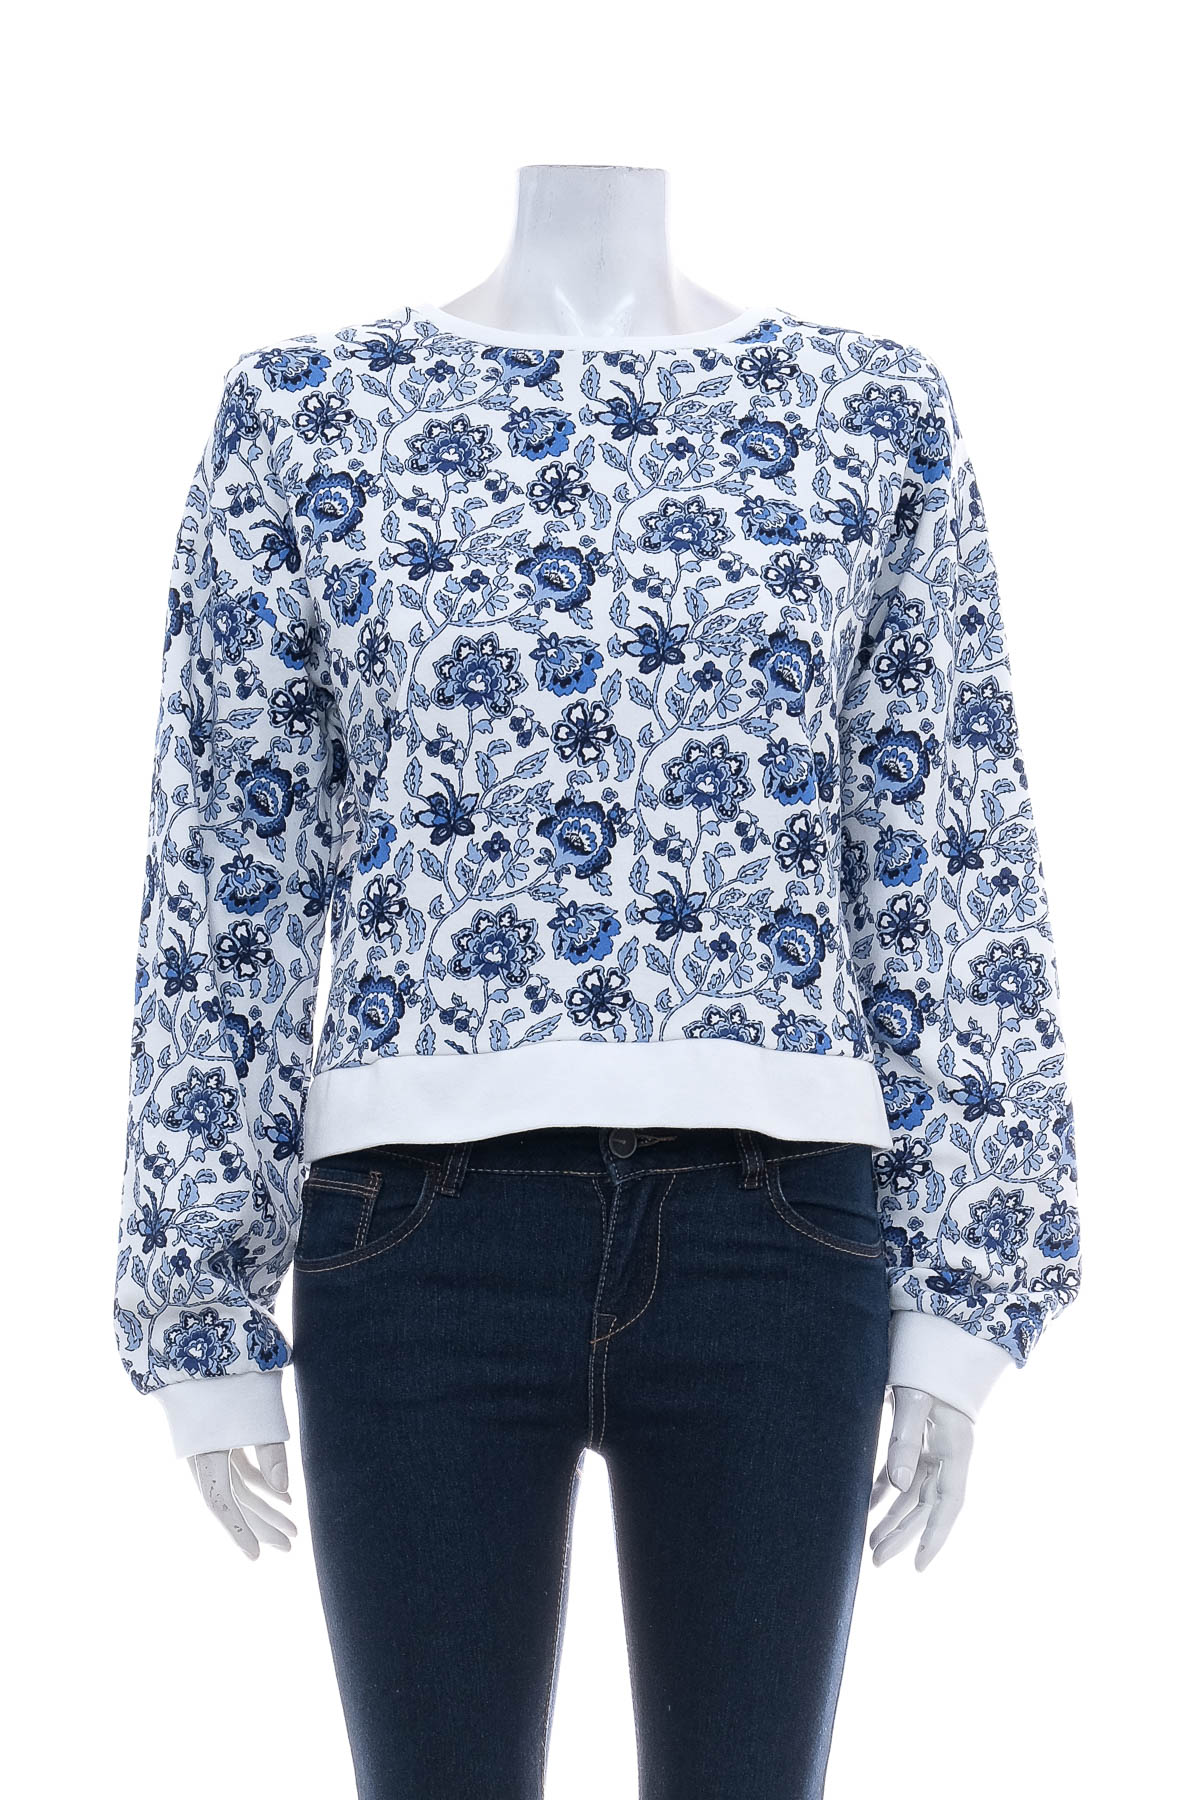 Girls' blouse - Pepe Jeans - 0